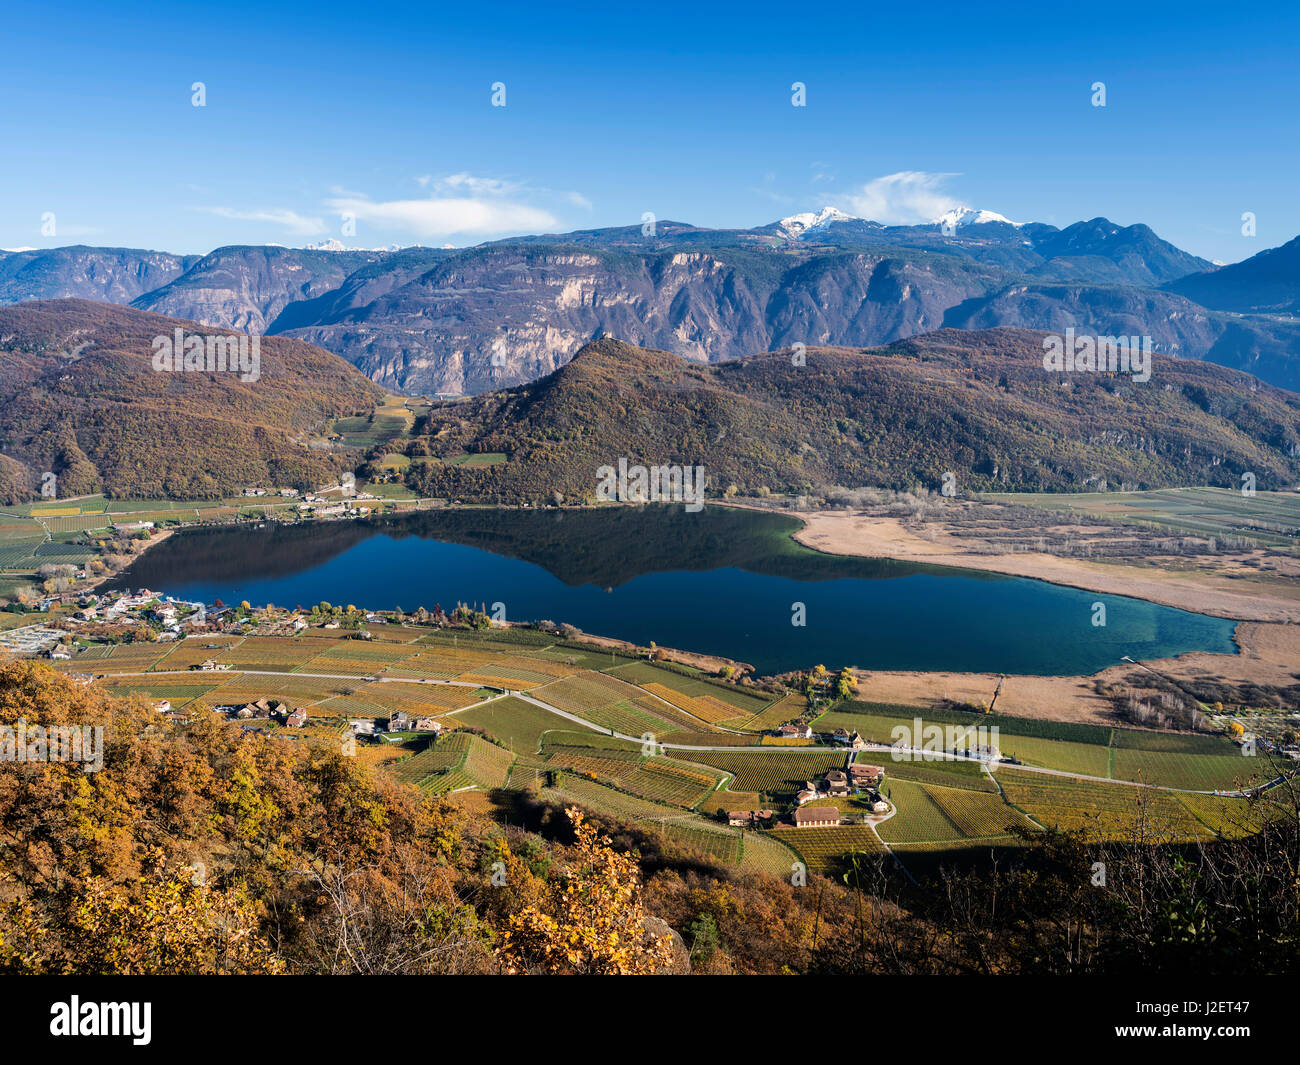 Lake Kalterer See (Lago di Caldaro) during autumn. The Dolomites and the Bletterbach canyon, both Unesco World Heritage Sites in the background. South Tyrol, Italy (Large format sizes available) Stock Photo